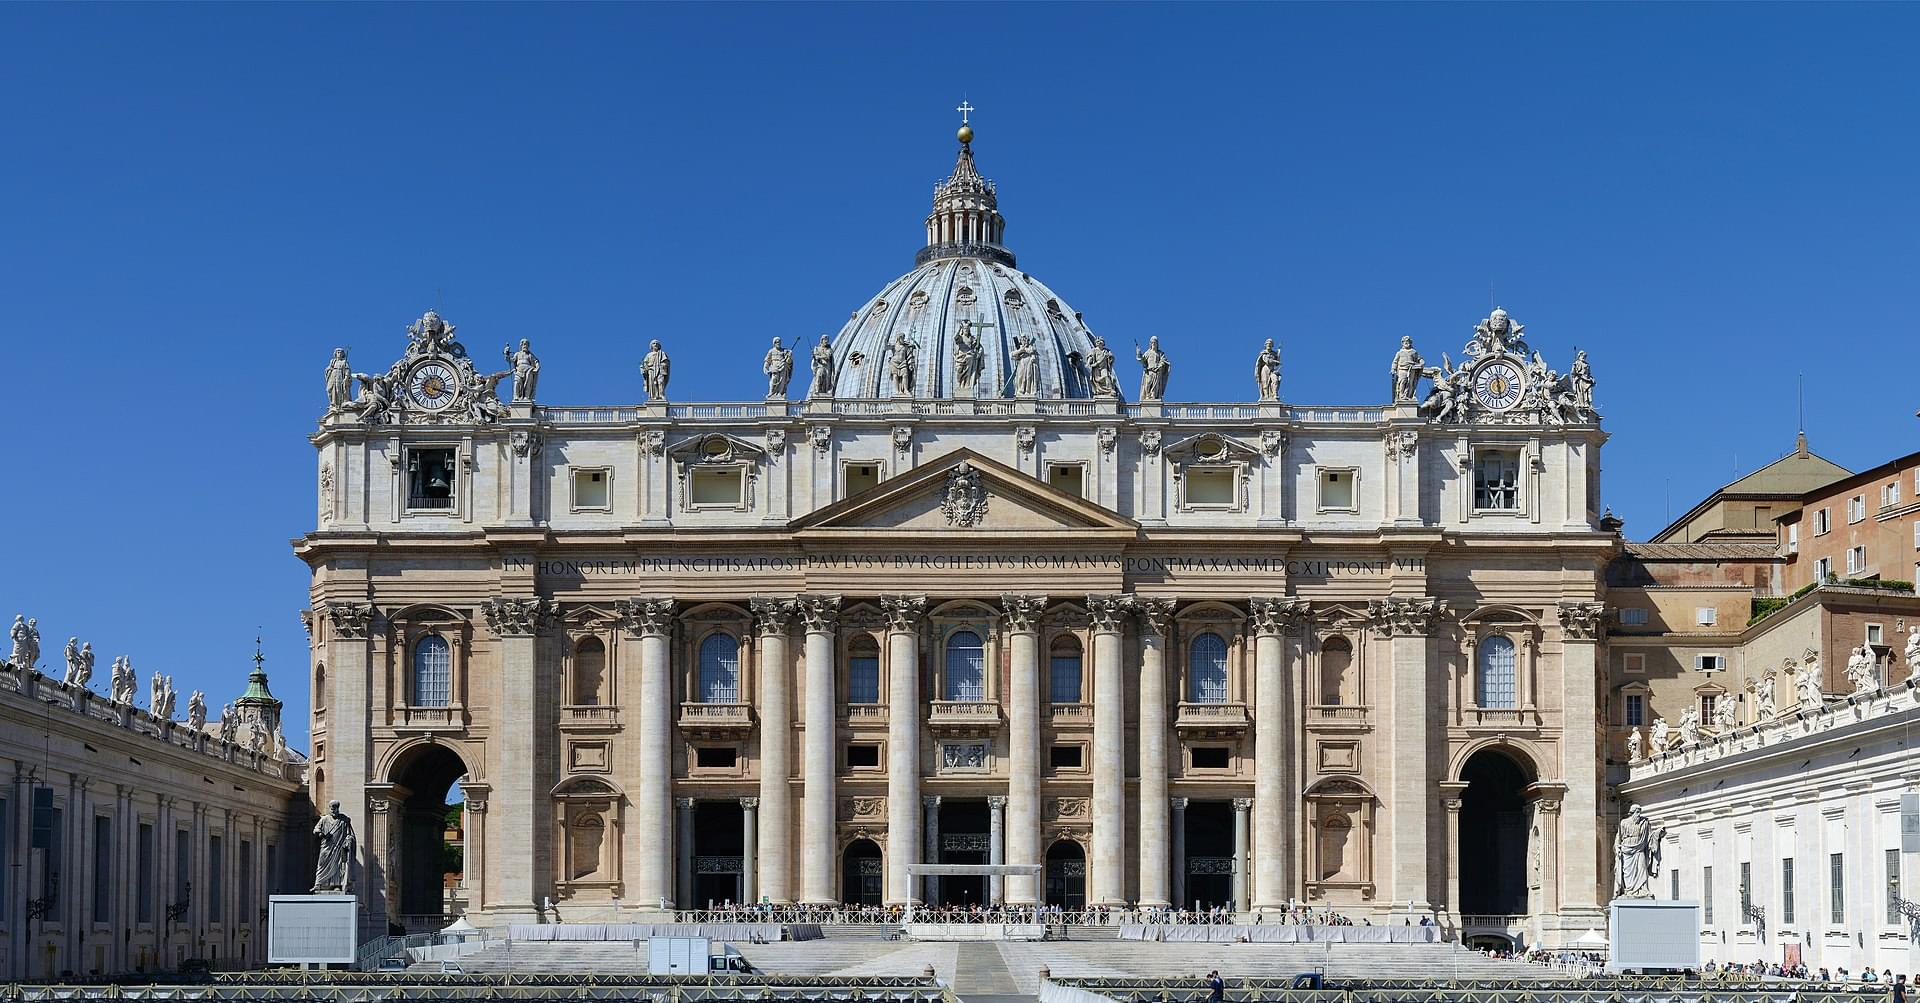 St Peter's Basilica Opening Hours